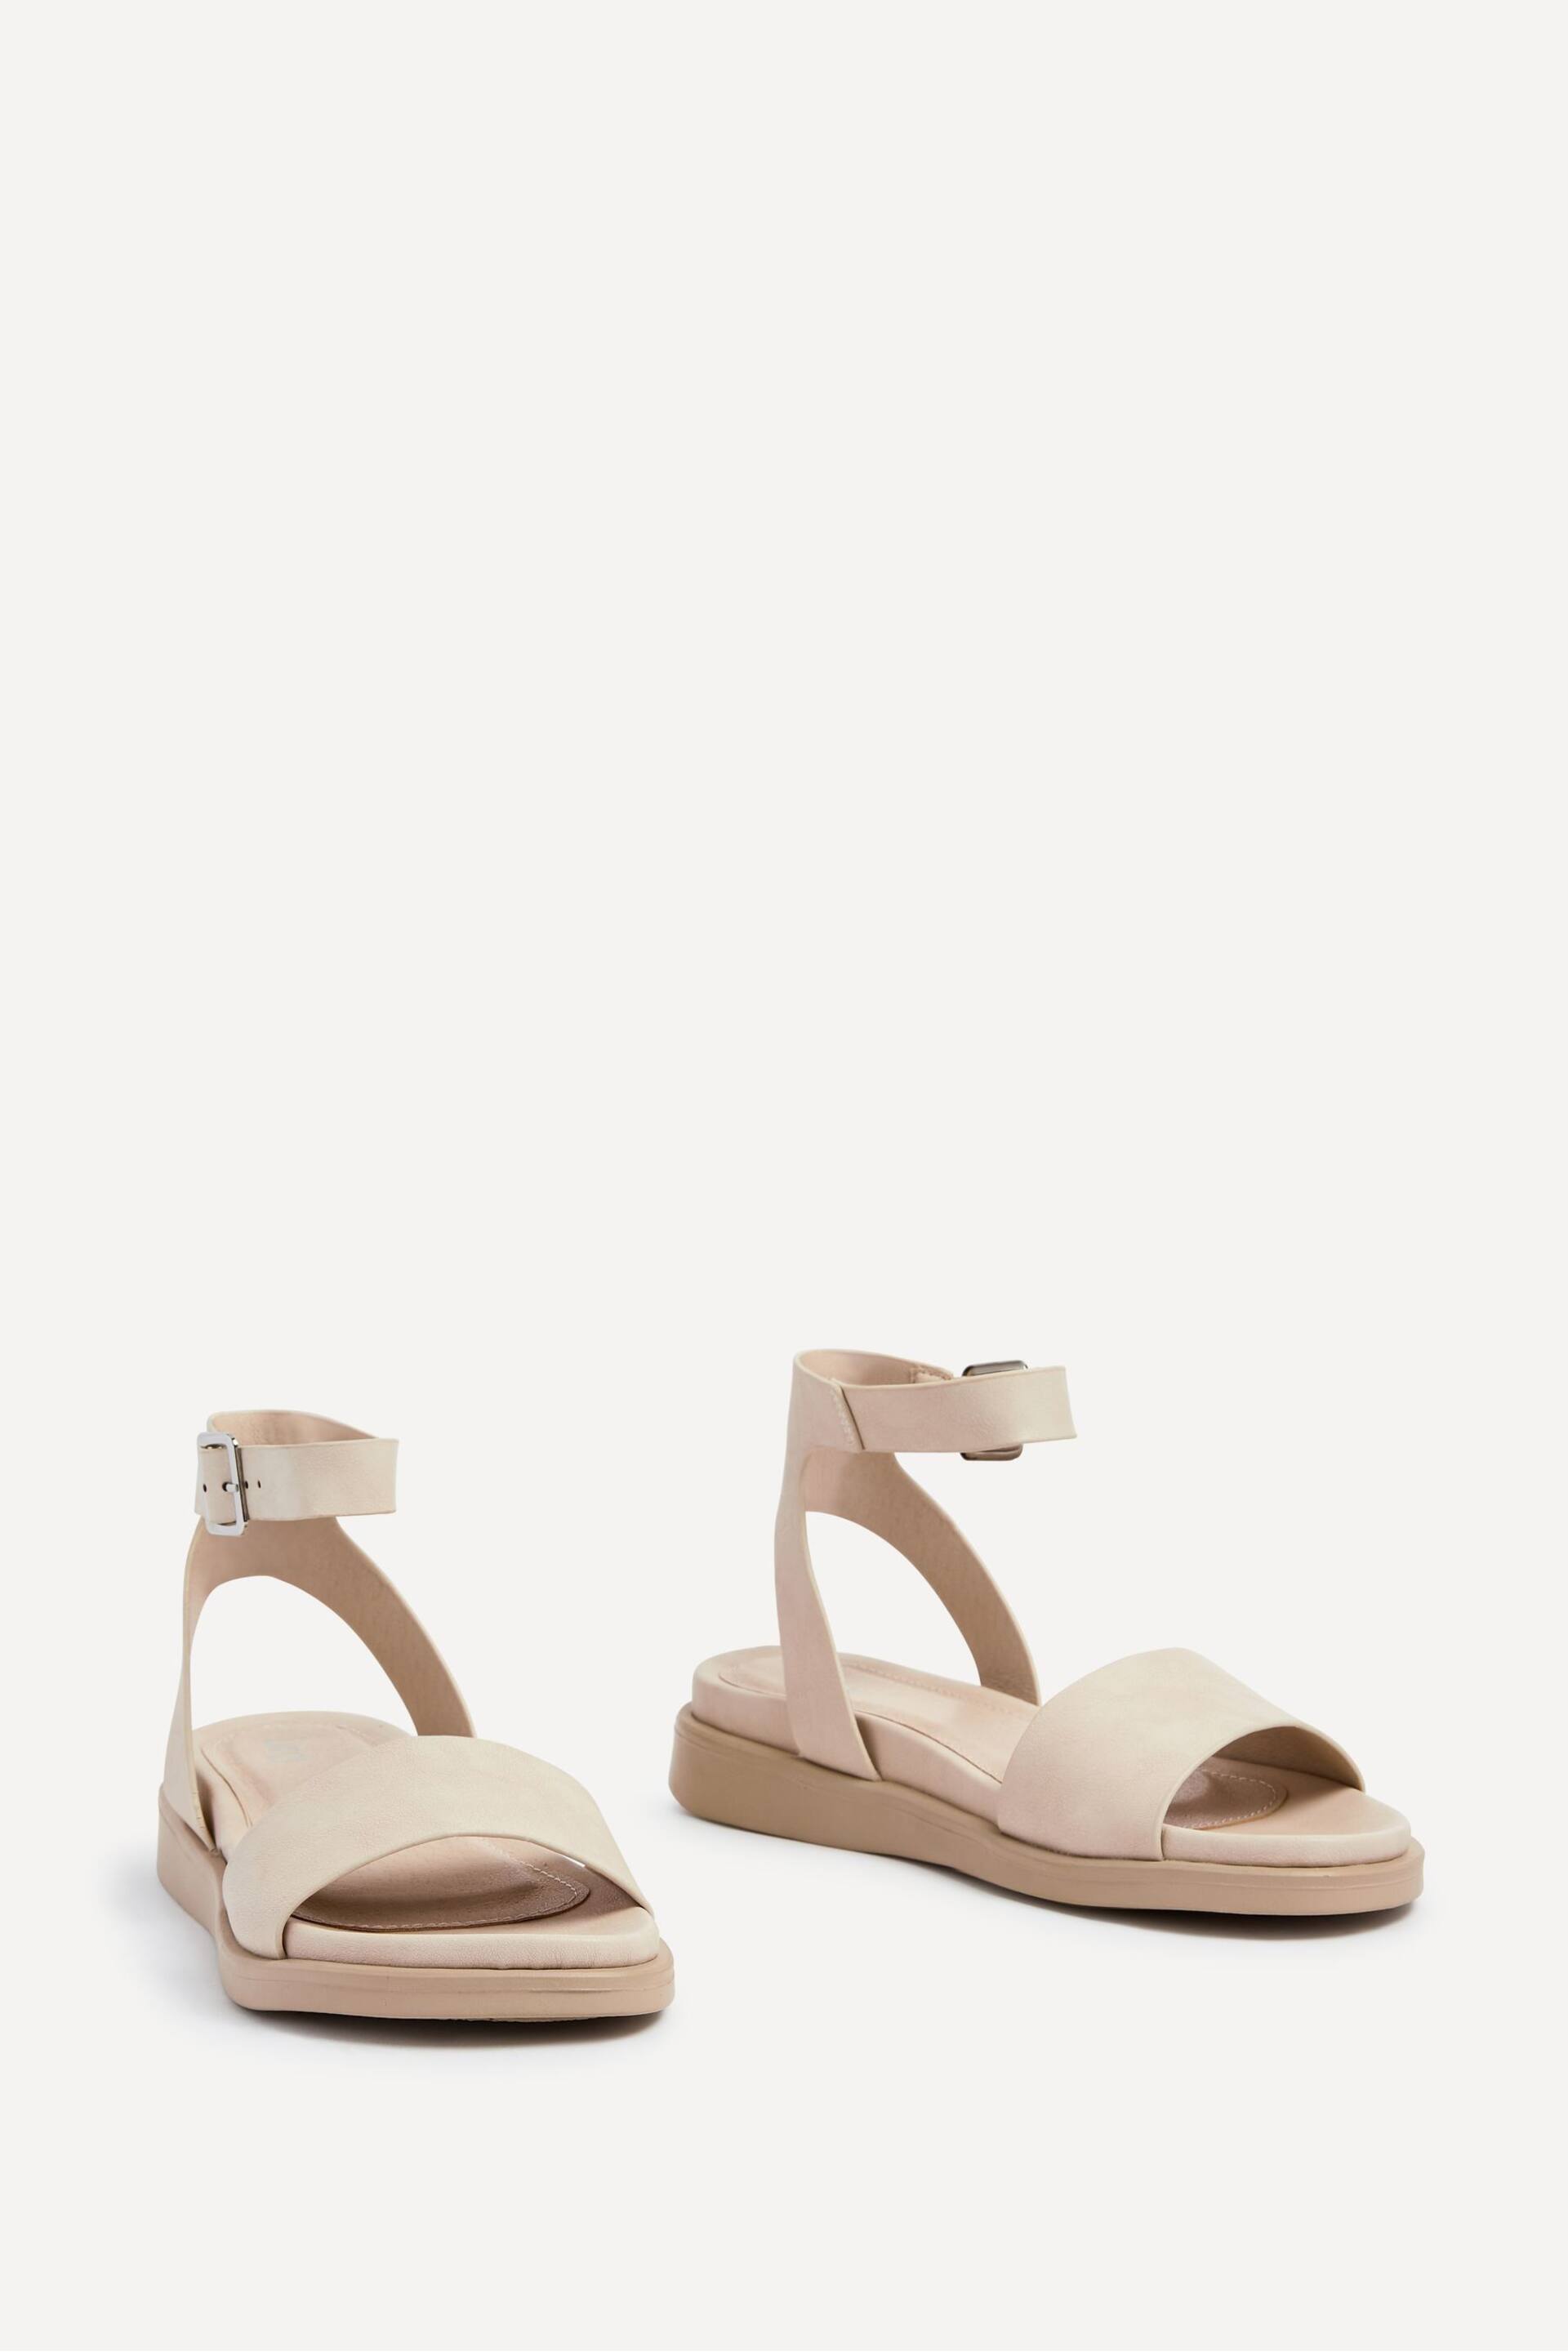 Linzi Cream Kara Two-Part Footbed Sandals - Image 3 of 5